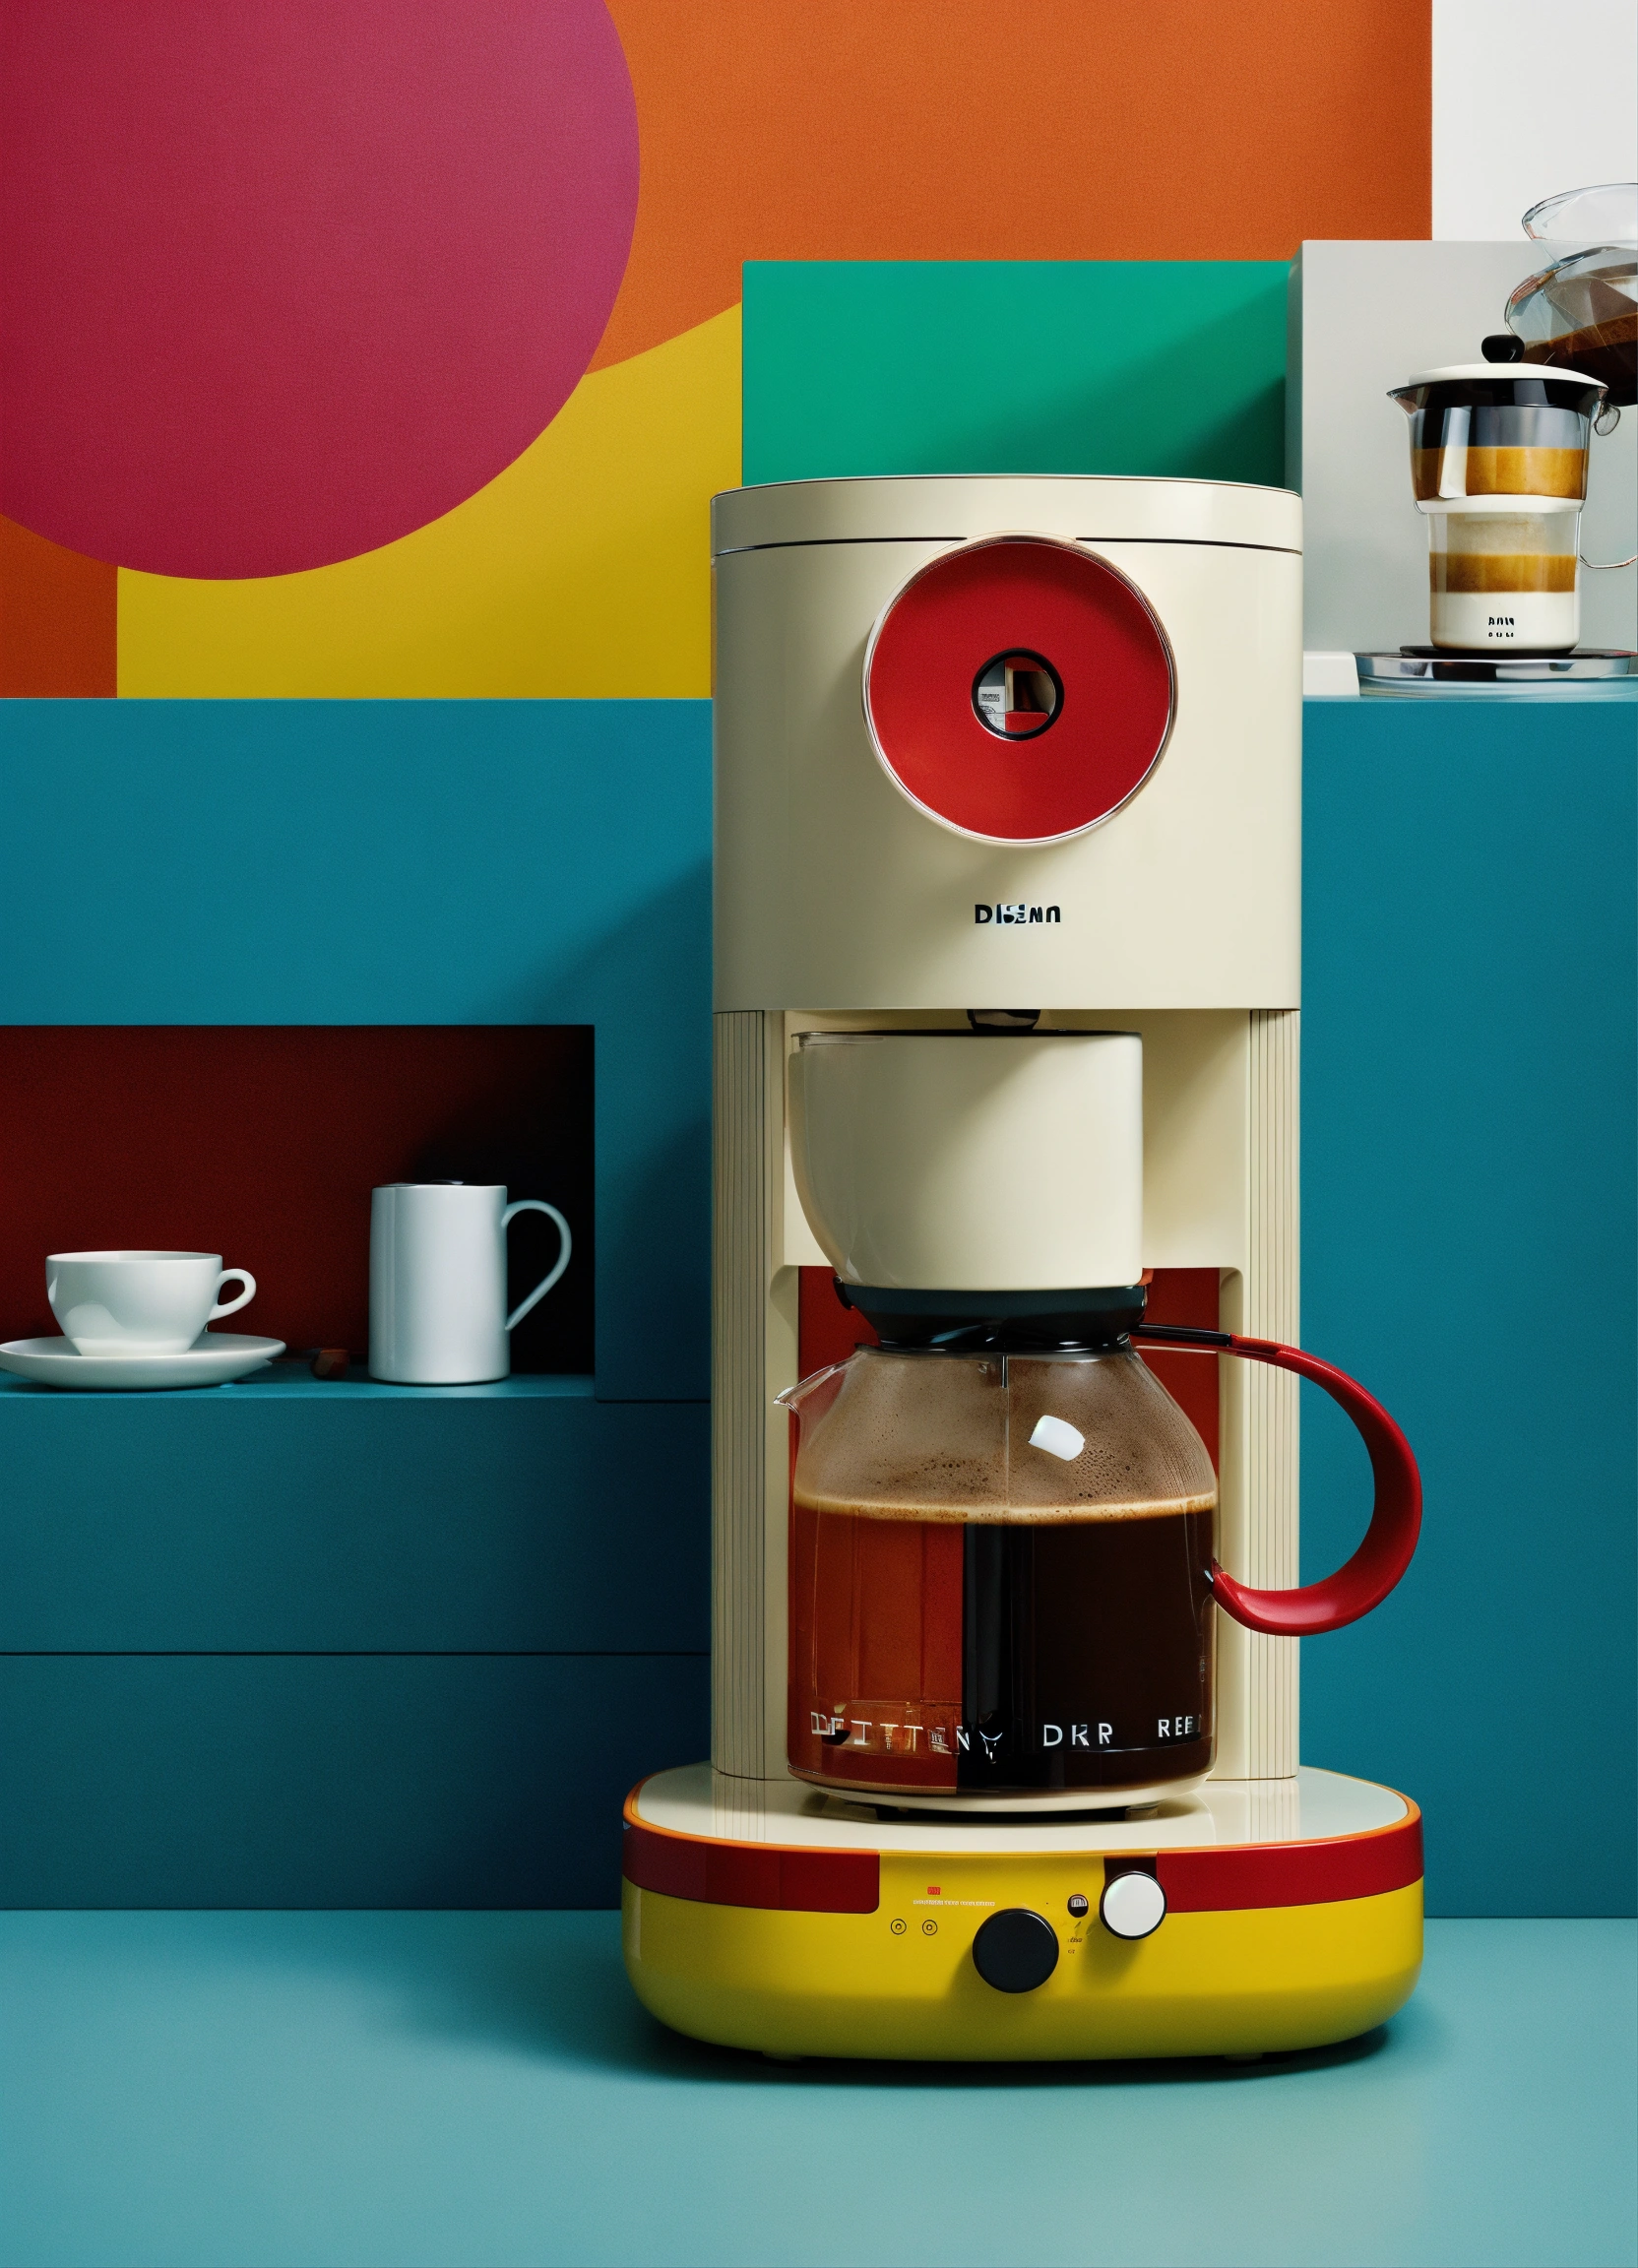 Lexica - A surreal coffee maker designed by Dieter Rams. Product